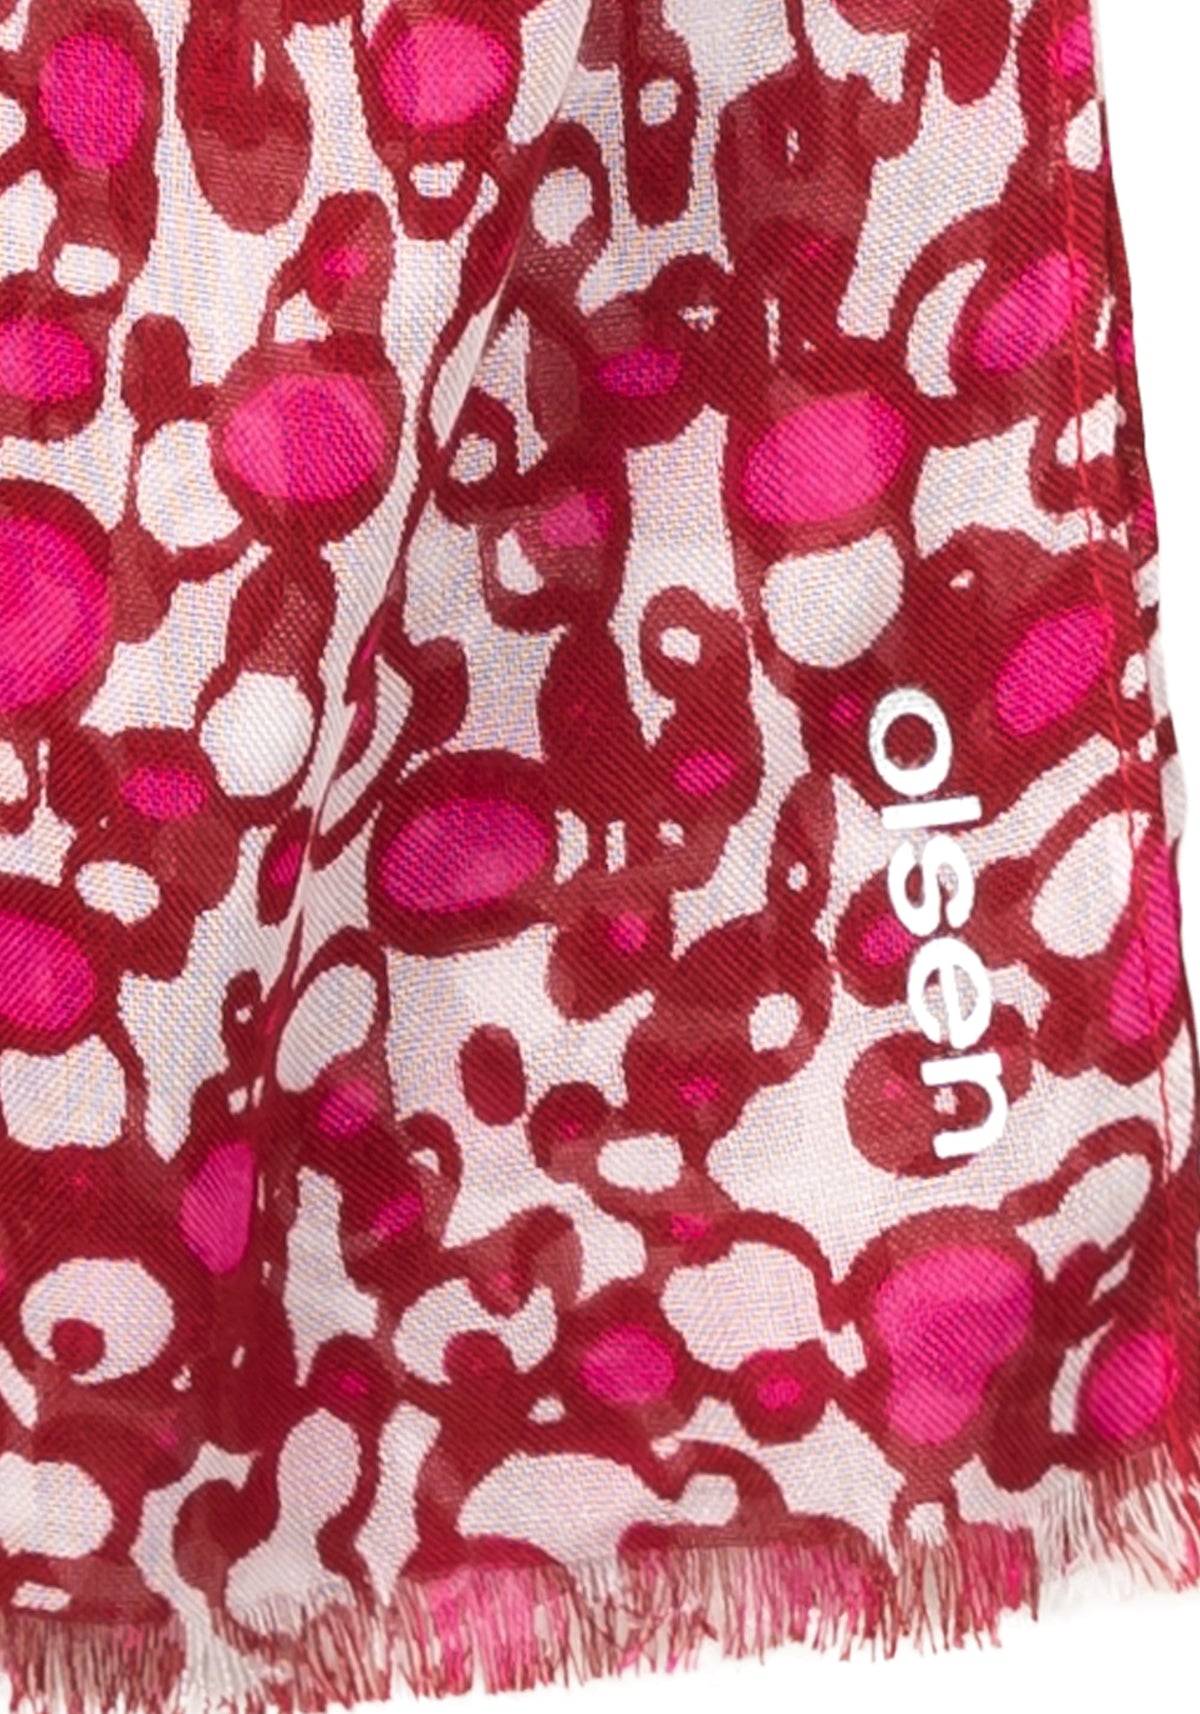 Allover Geo Print Scarf with Frayed Edge Trim